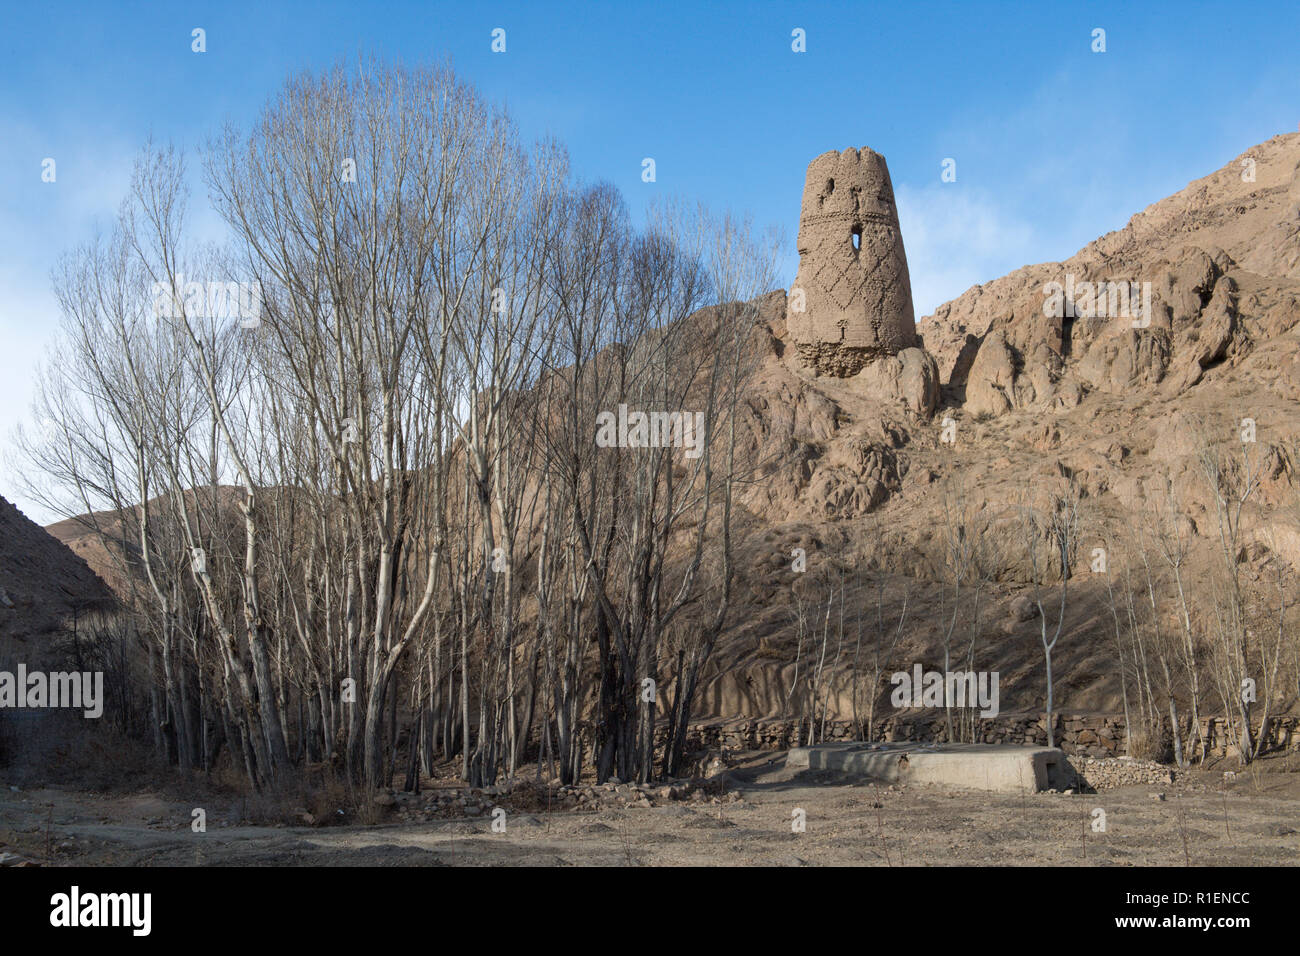 Remains Of Fortified Tower On A Hill With Leafless Trees In The Foreground Near Bamyan In Winter, Bamyan Province, Afghanistan Stock Photo